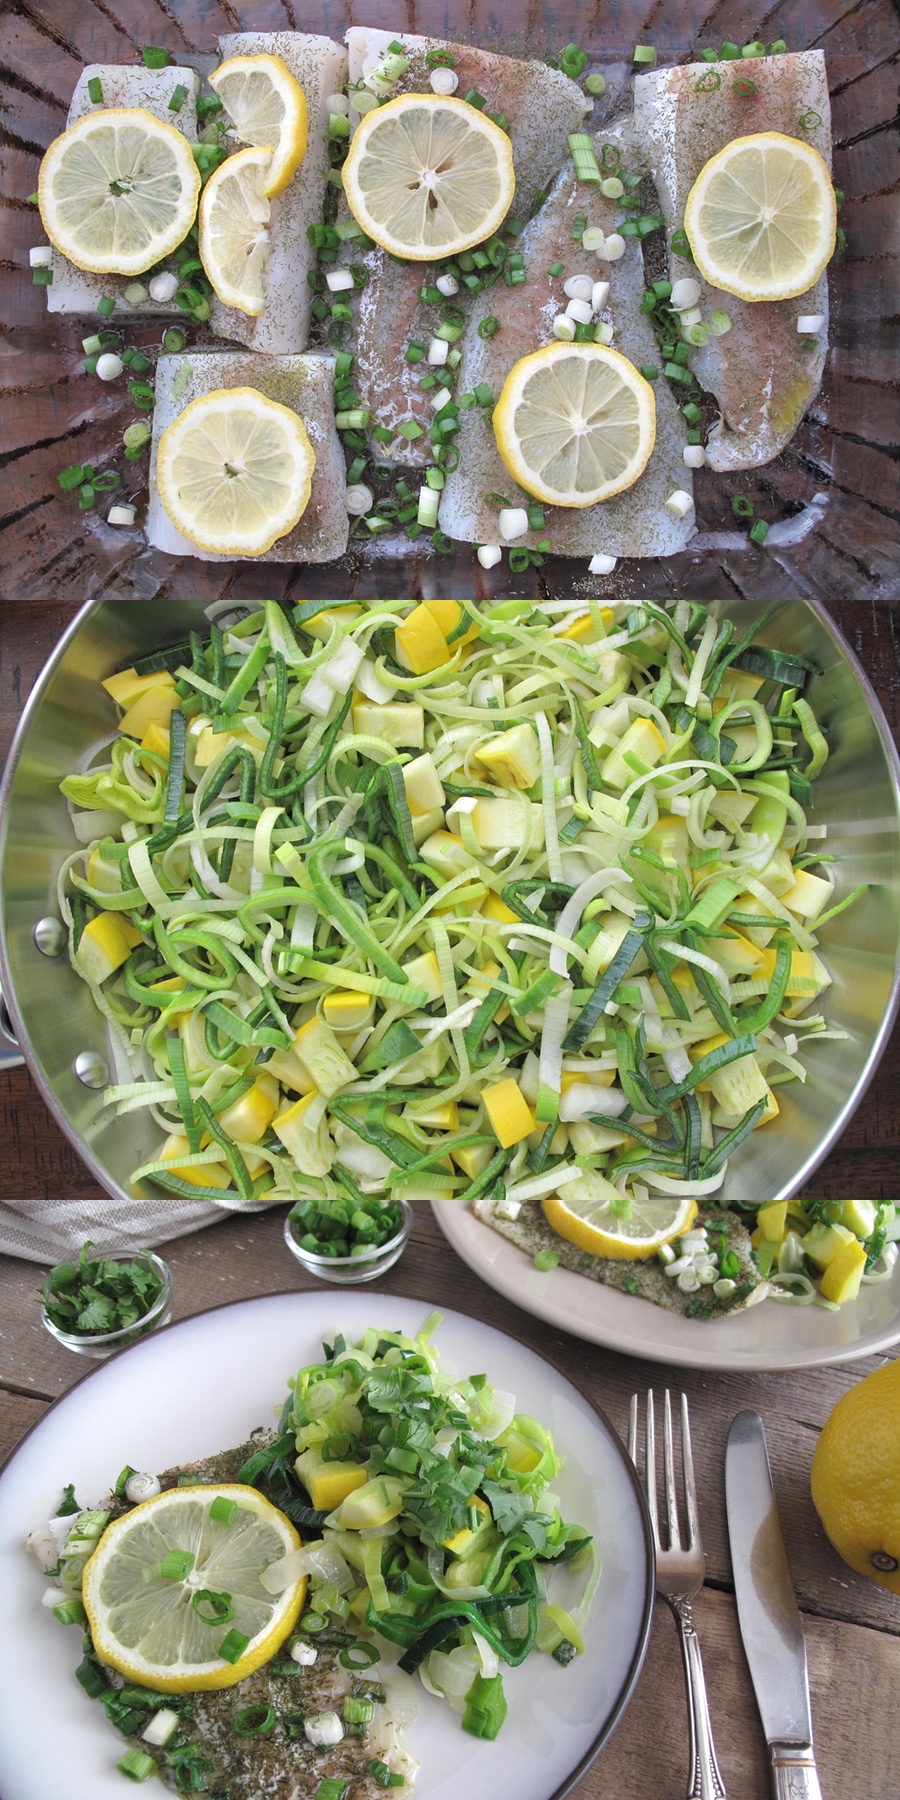 AIP / Paleo Oven Baked Cod Fish with Spring Vegetables